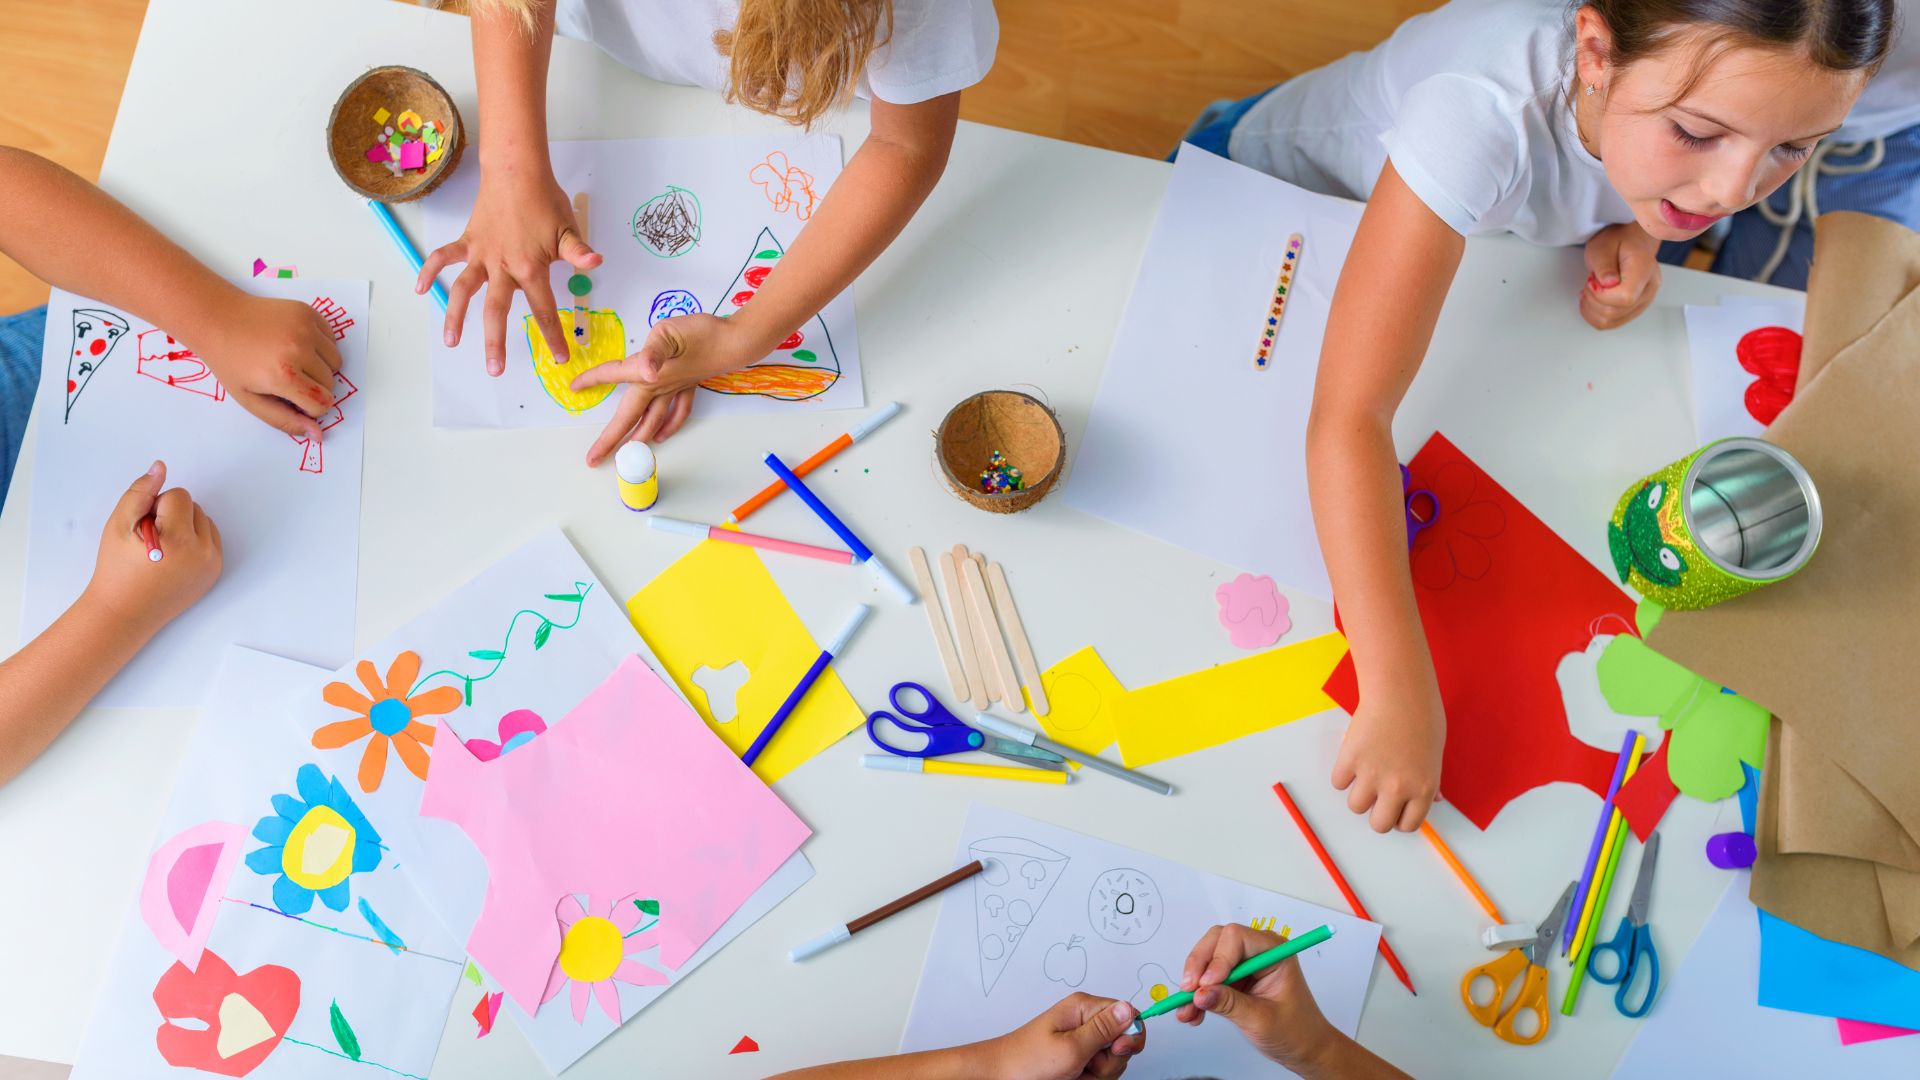 Creative play and art activities